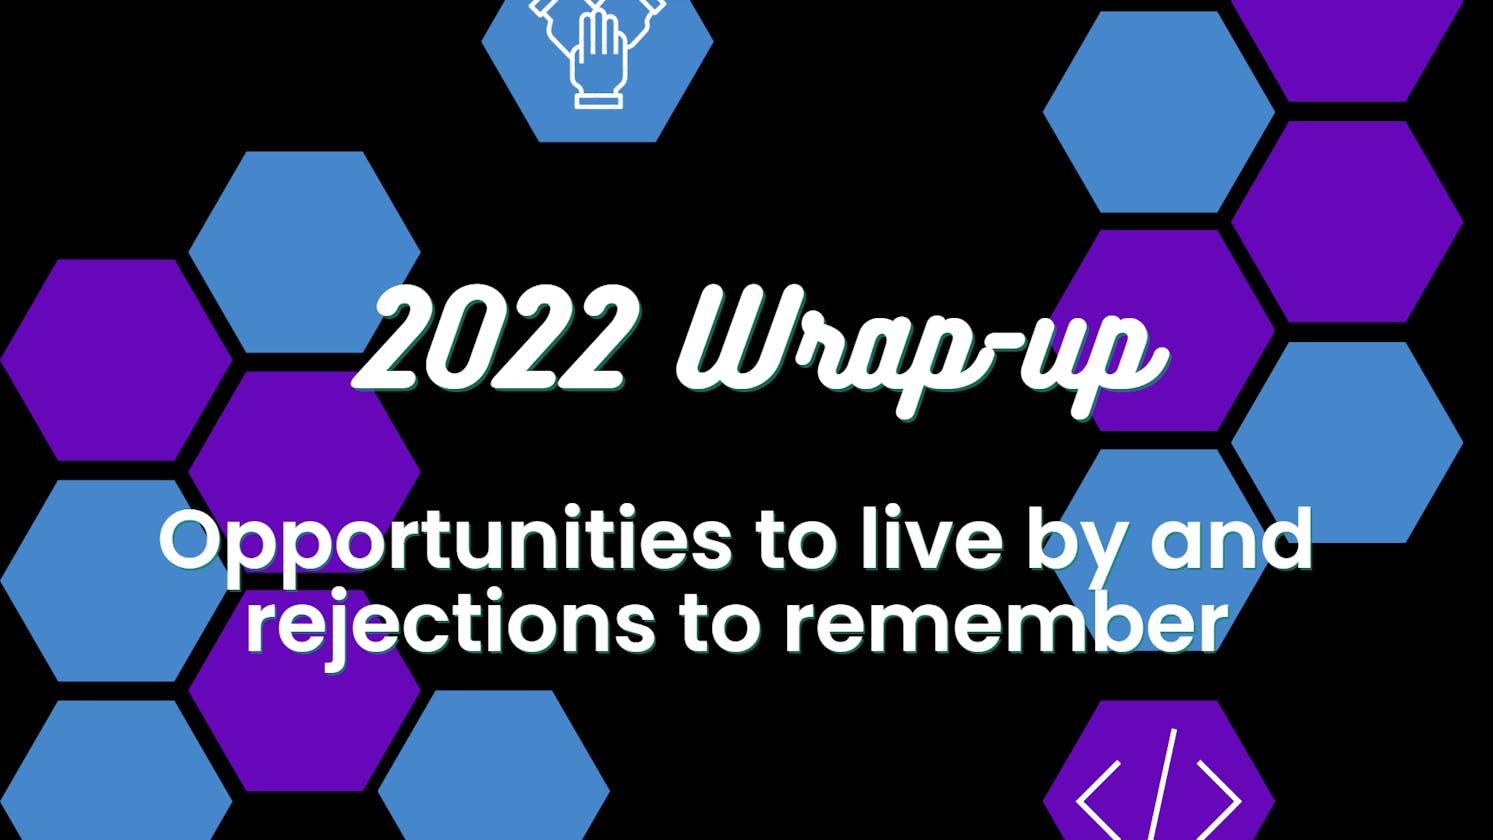 2022 Wrap-Up: Opportunities to live by and Rejections to remember